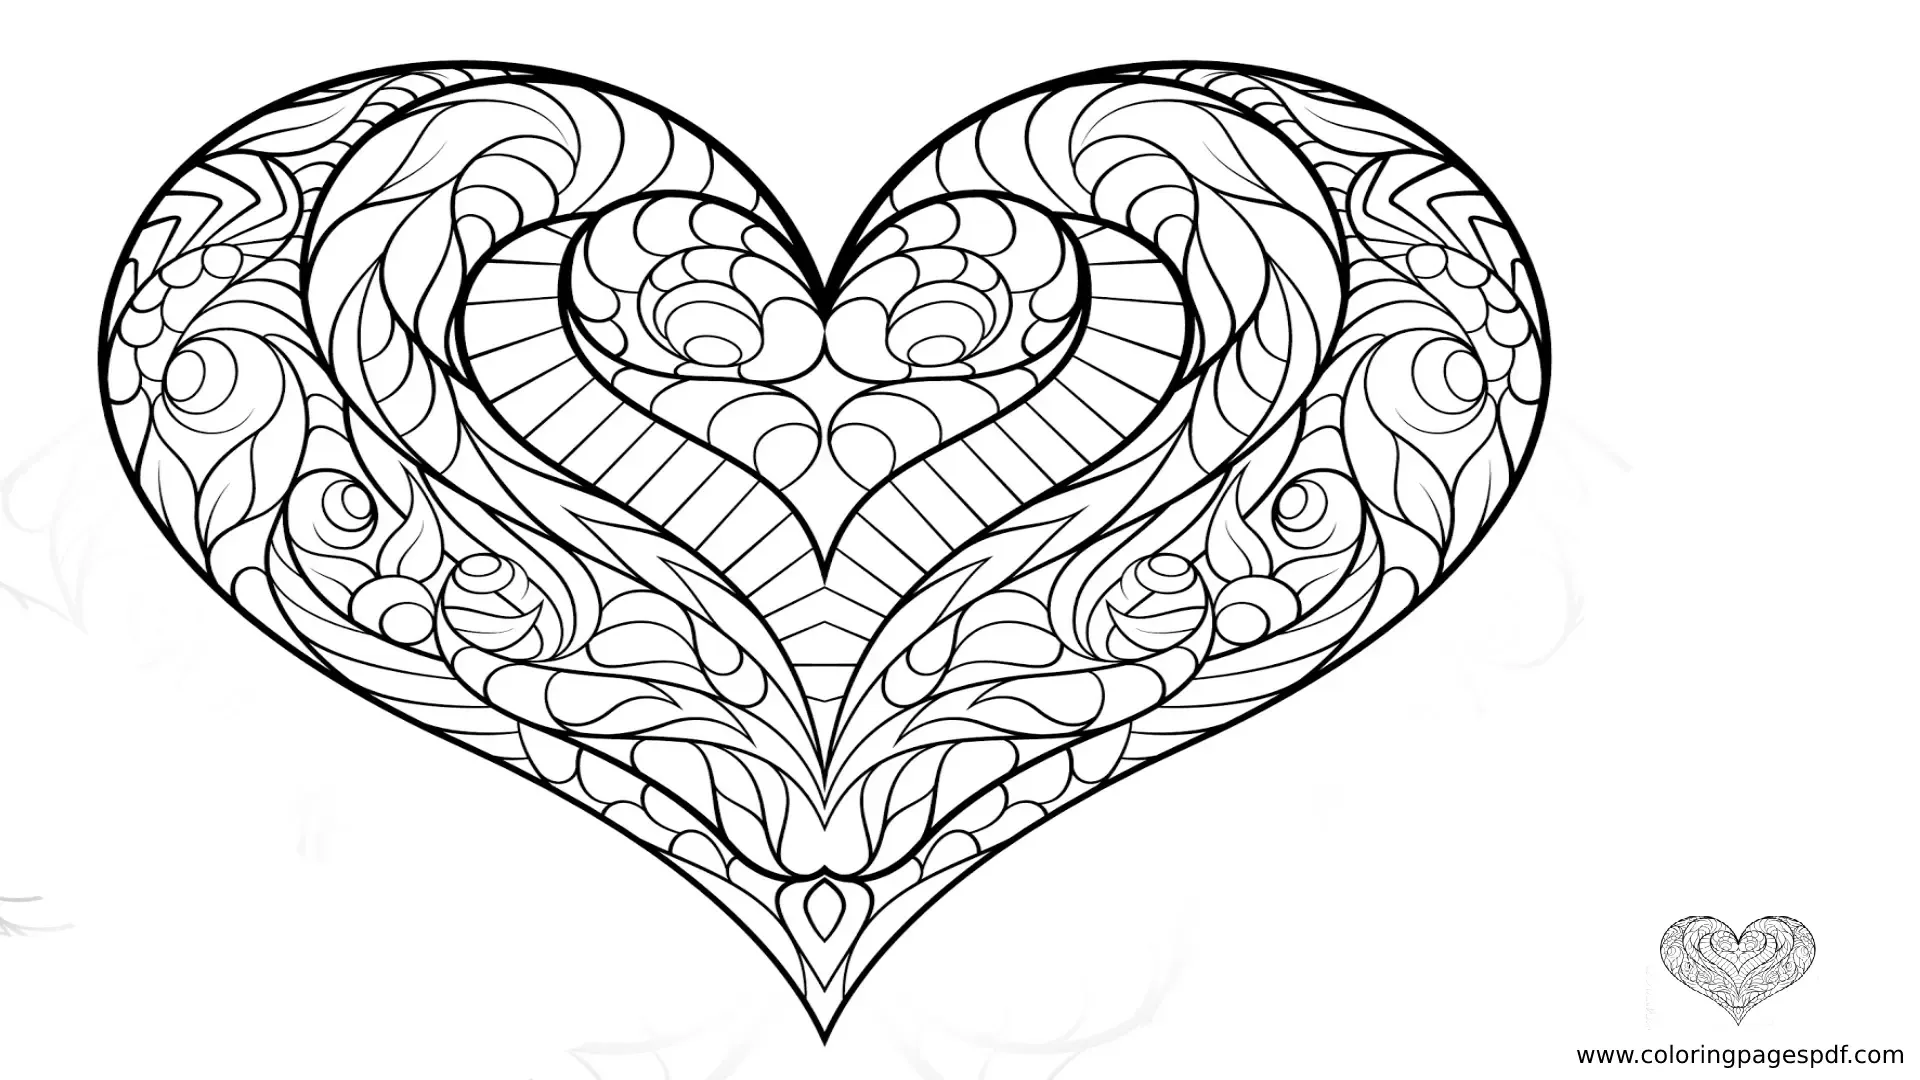 Coloring Pages Of A Spelndid Heart Design